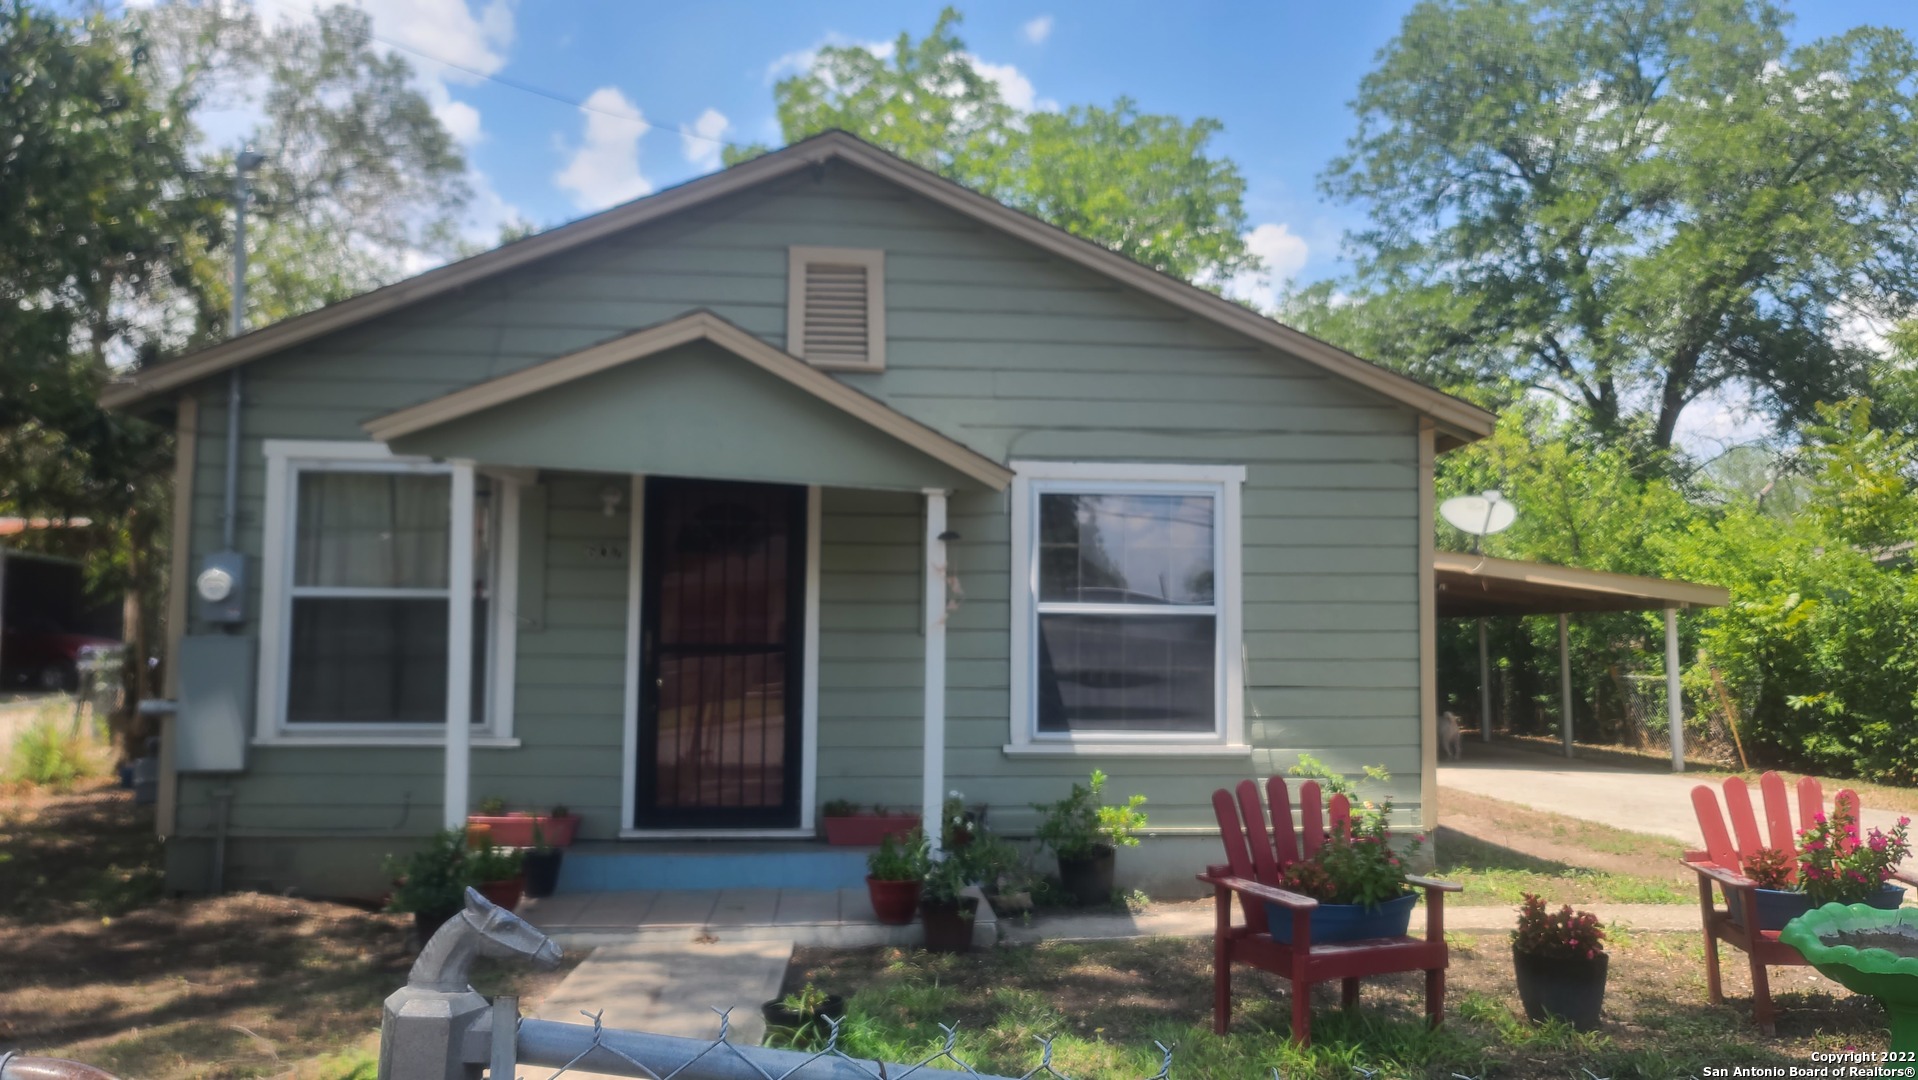 Wonderful starter/investor home located in the Harlandale/Lone Star district!!  Charming 3 bedroom 2 bath, open floorplan, Texas size covered patio, greenbelt, great curb appeal.  Quick access to I-35/Lackland AFB/ shopping and dining.